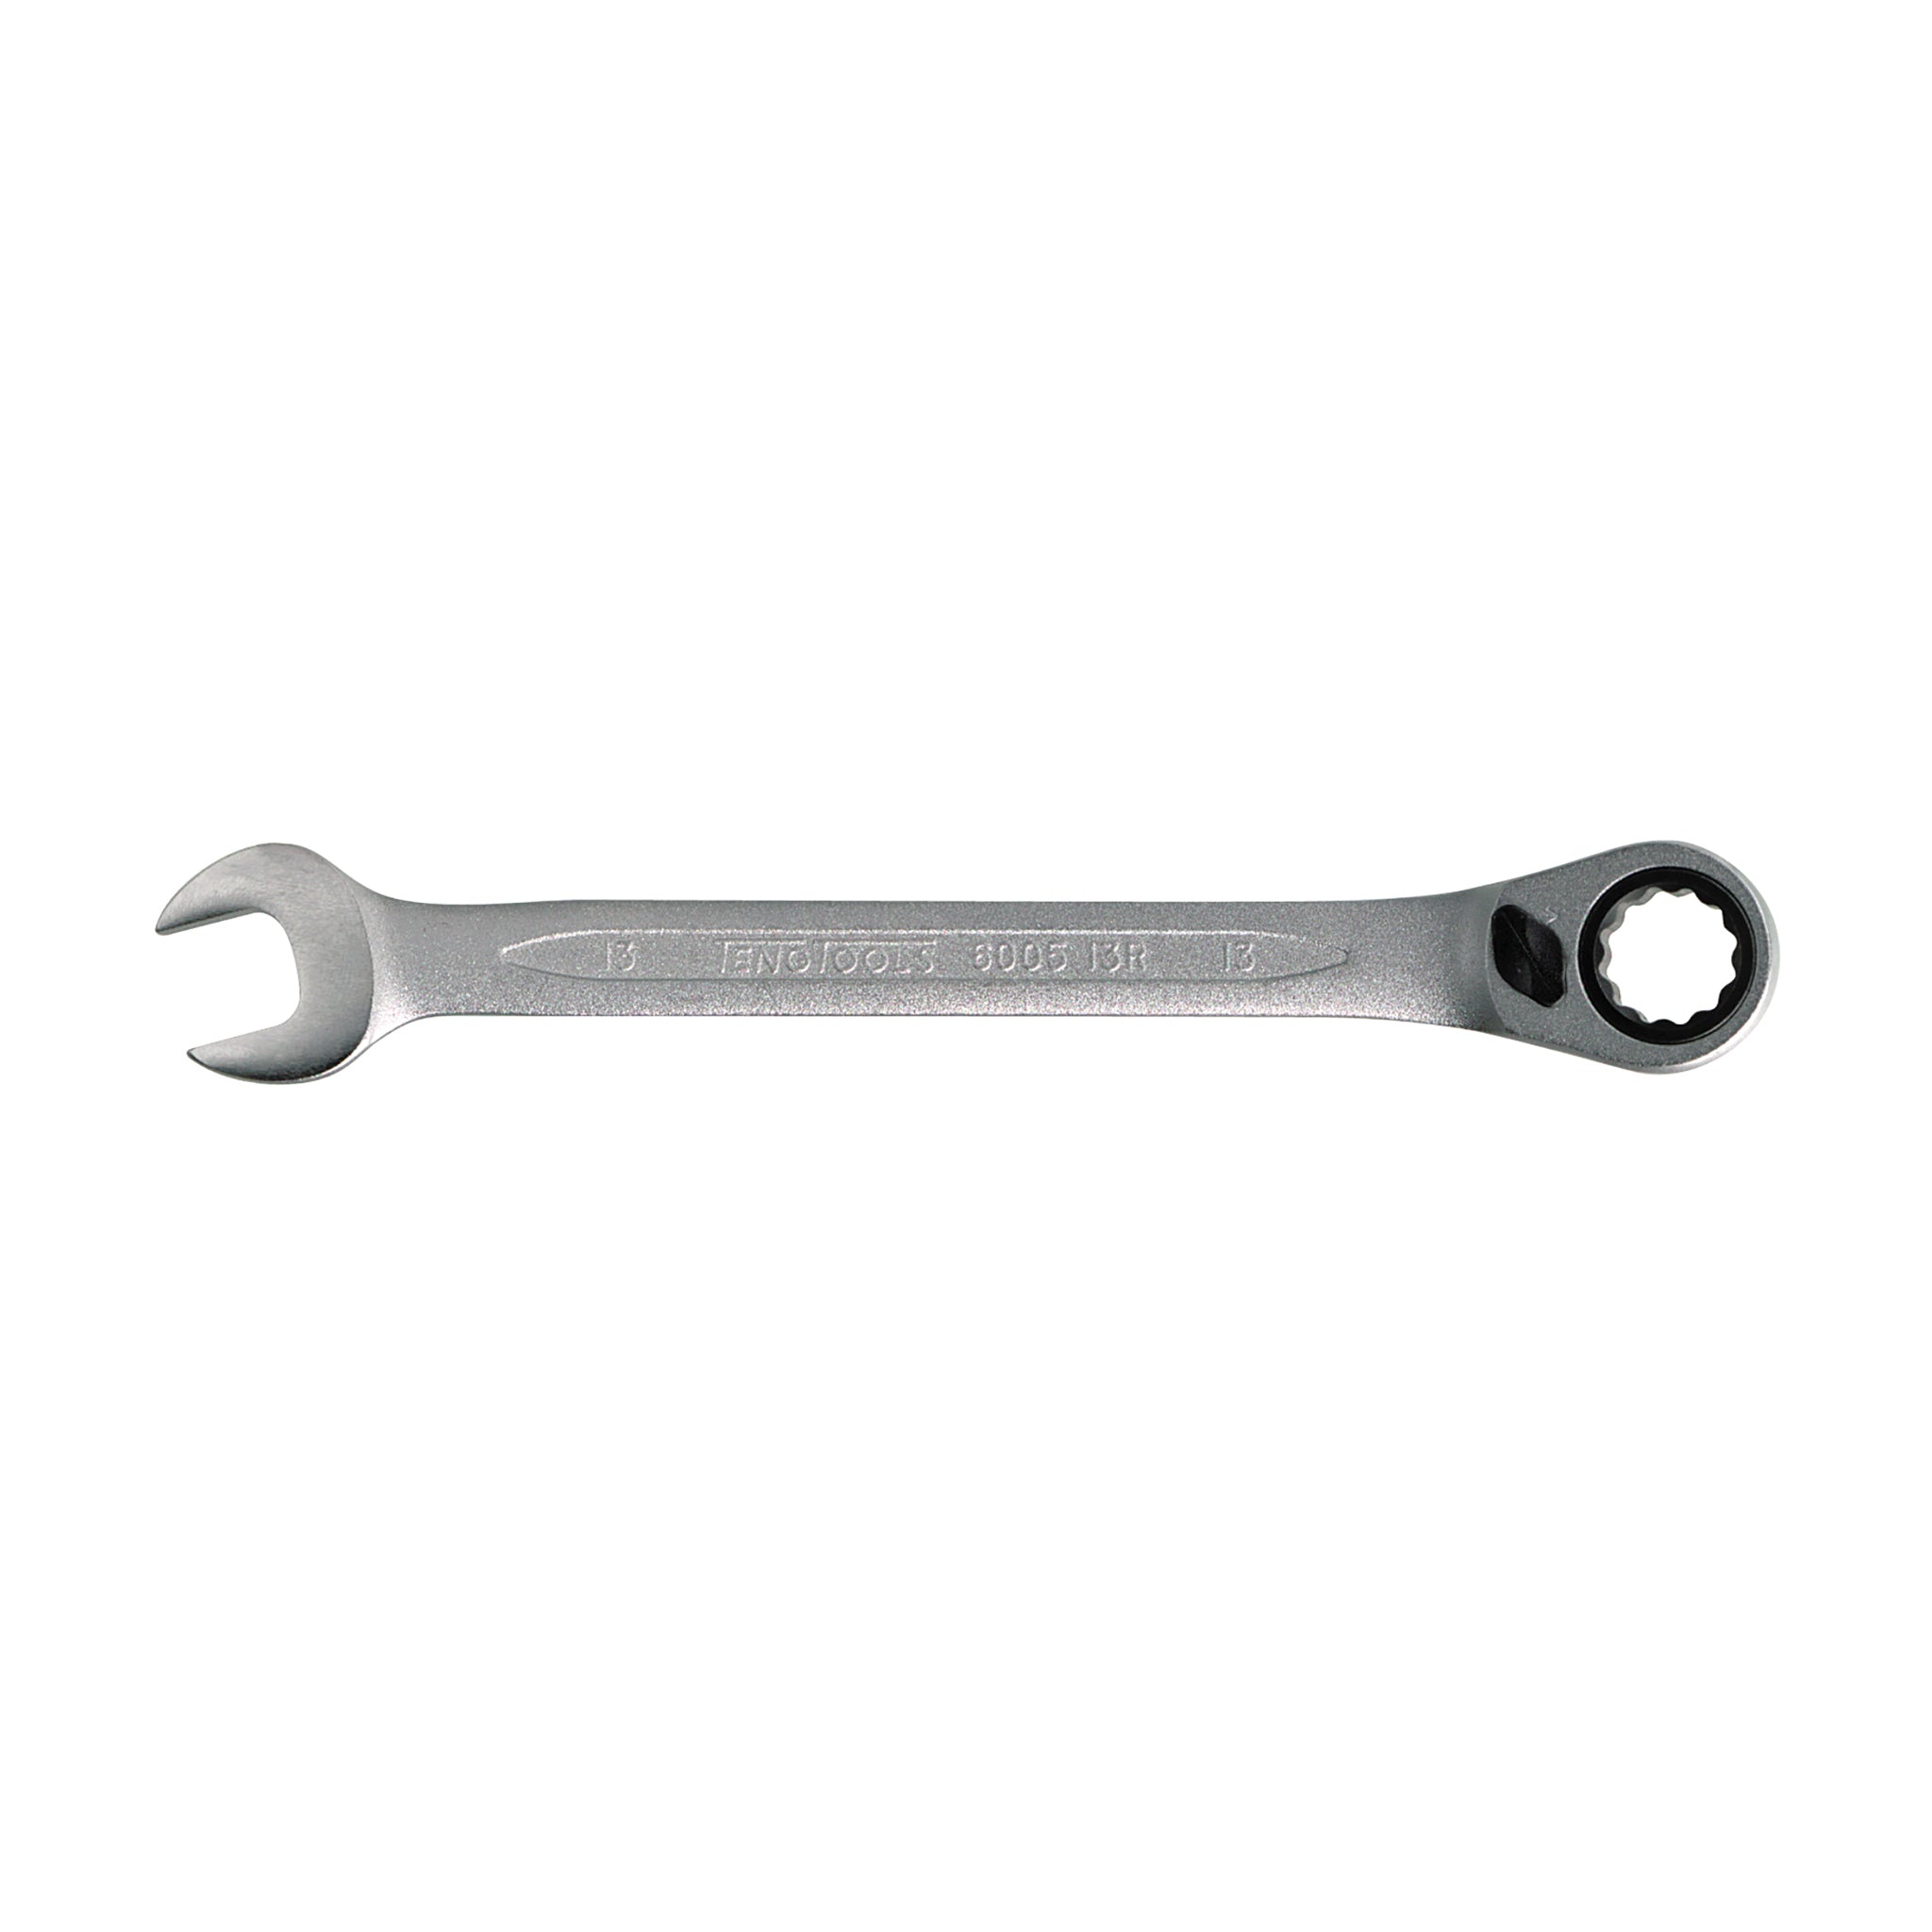 72 Teeth Ratchet Combination Metric Wrenches With Flip Reverse Lever - 12mm